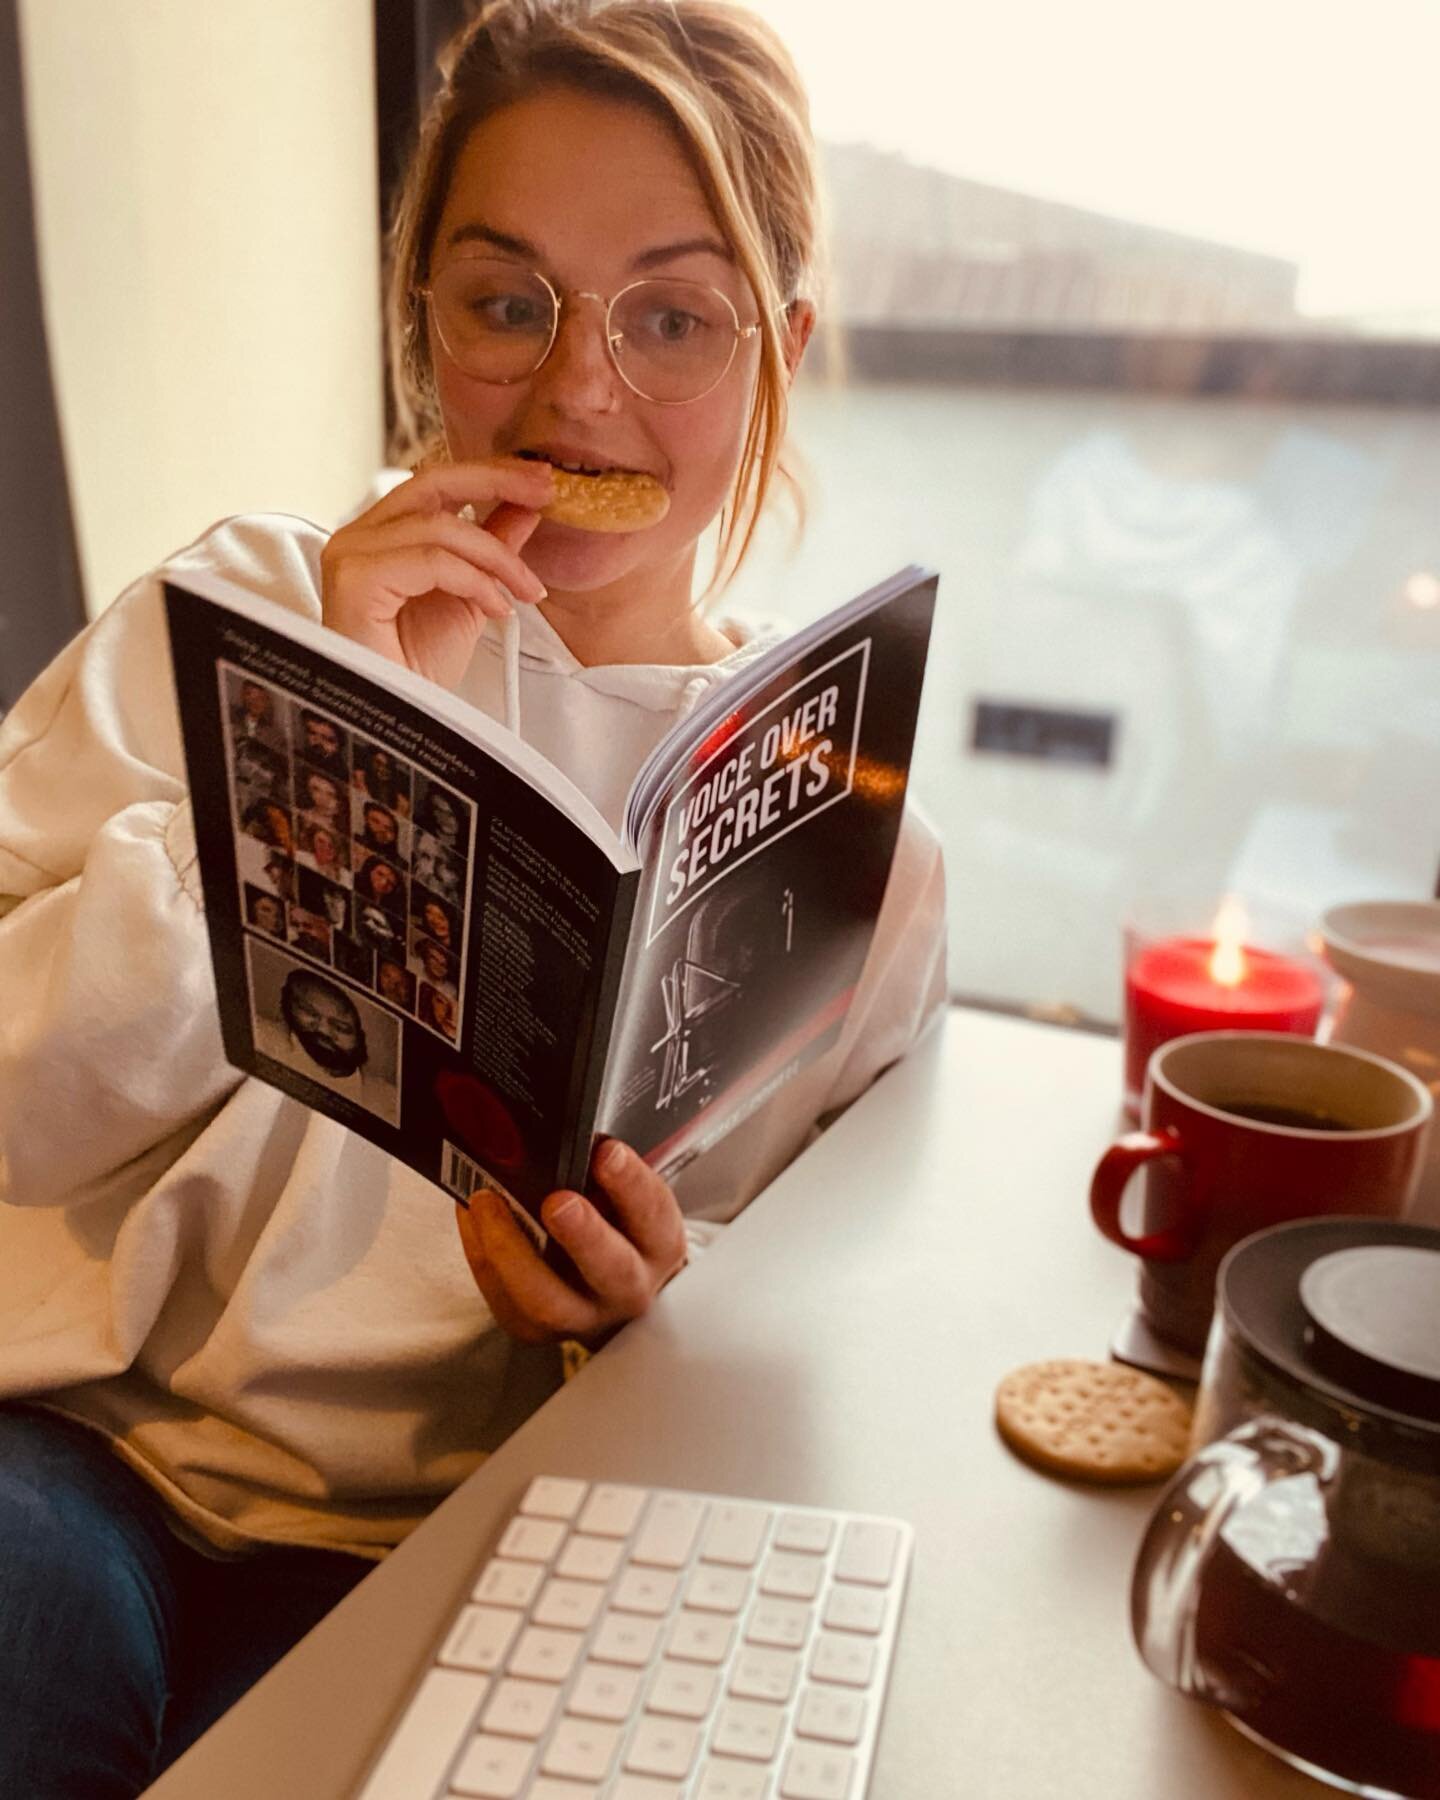 📸 CANDID PHOTO ALERT 📸

Disclaimer: I promise I had no idea the camera was even there and these photos are in no way staged.

📖 My apologies for the book spam but it IS #WorldBookDay and our #NumberOneBestSeller arrived in the post today!

I am so